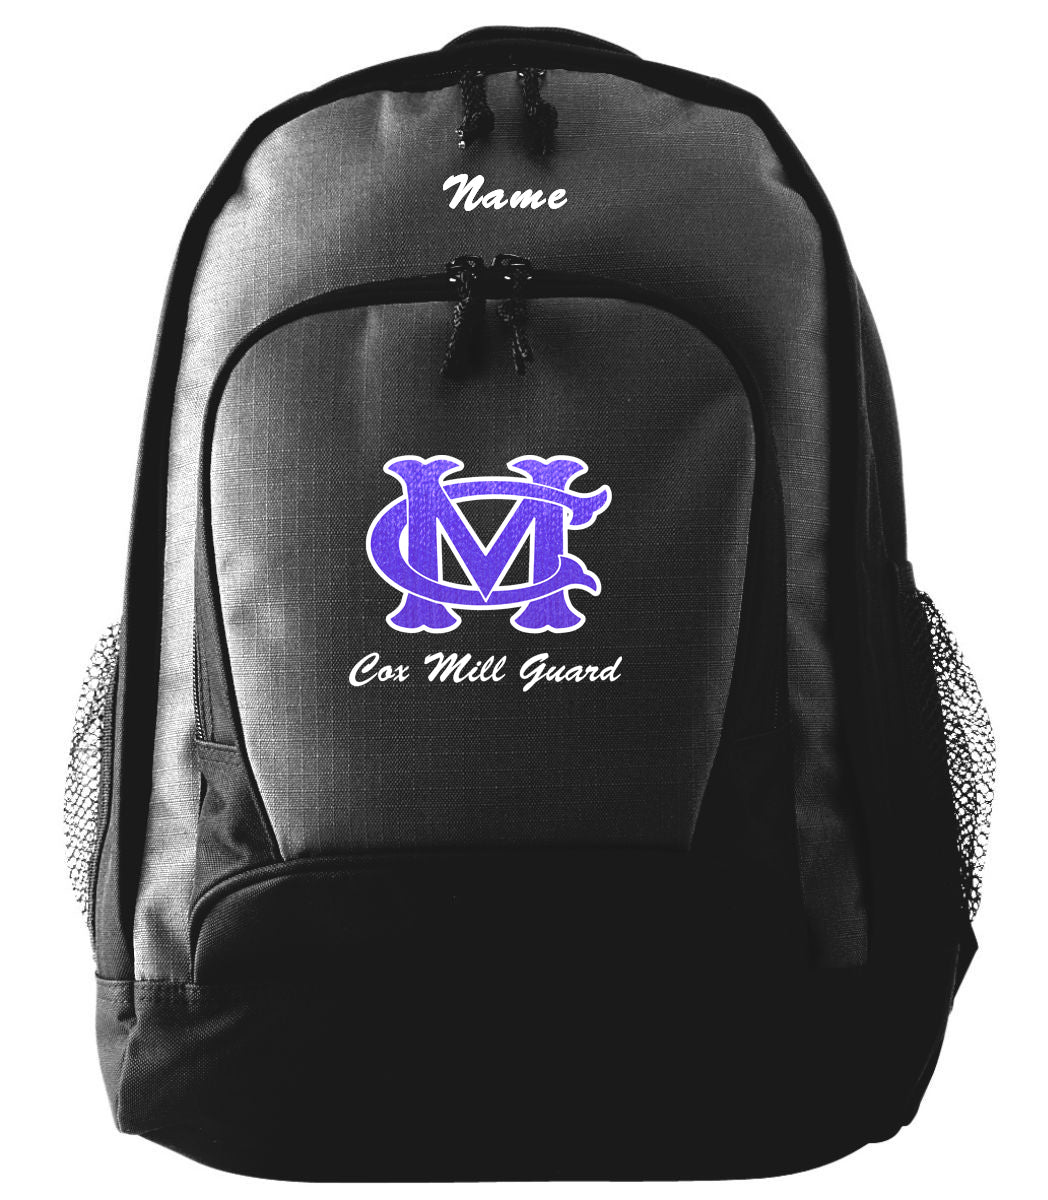 Cox Mill Ripstop Backpack w/ Name & Logo Embroidery